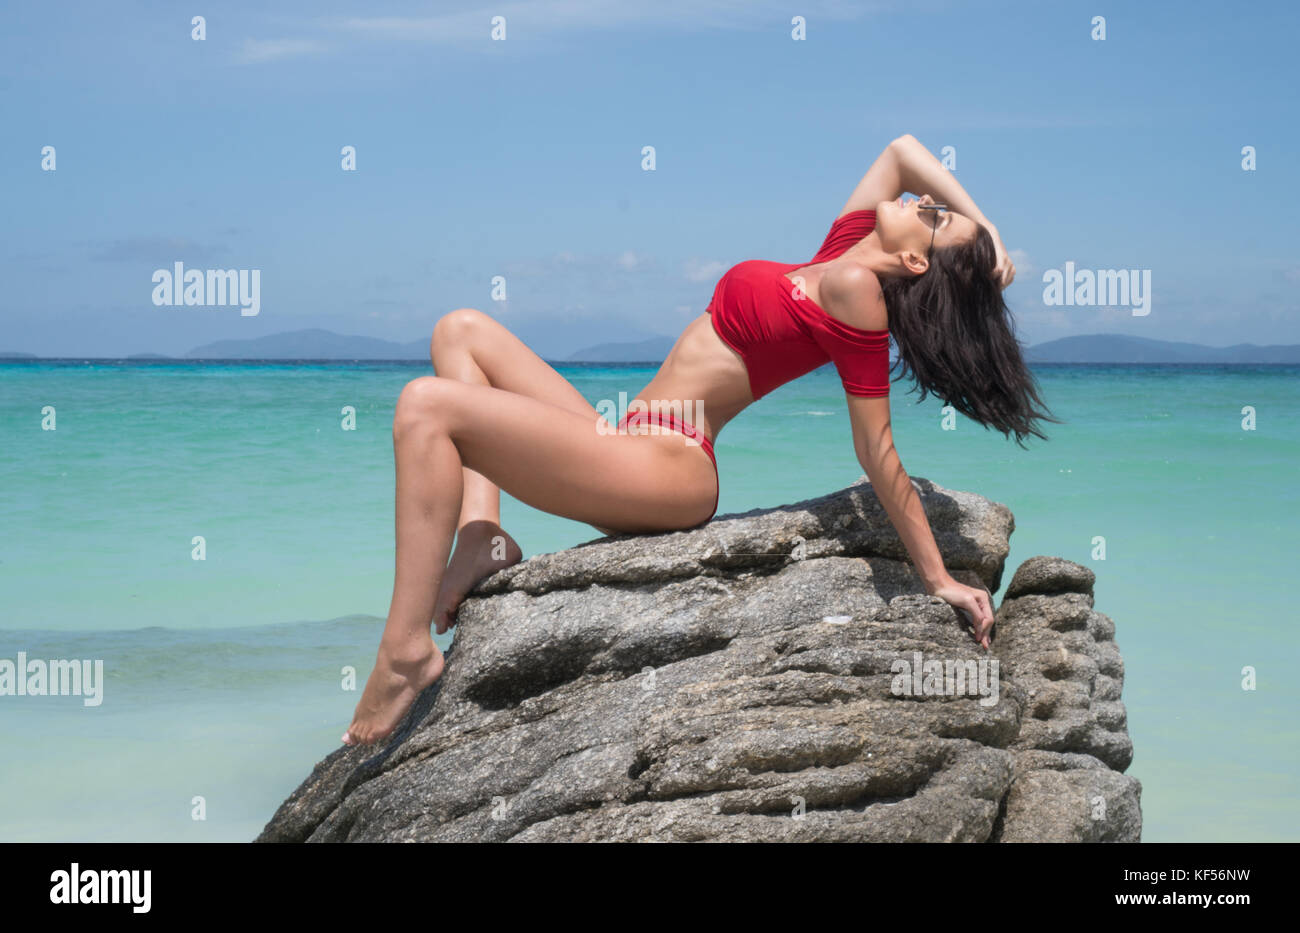 Beautiful brunette woman in red bikini and sunglasses posing on the rock of sandy paradise island beach over blue sea and sky background Stock Photo